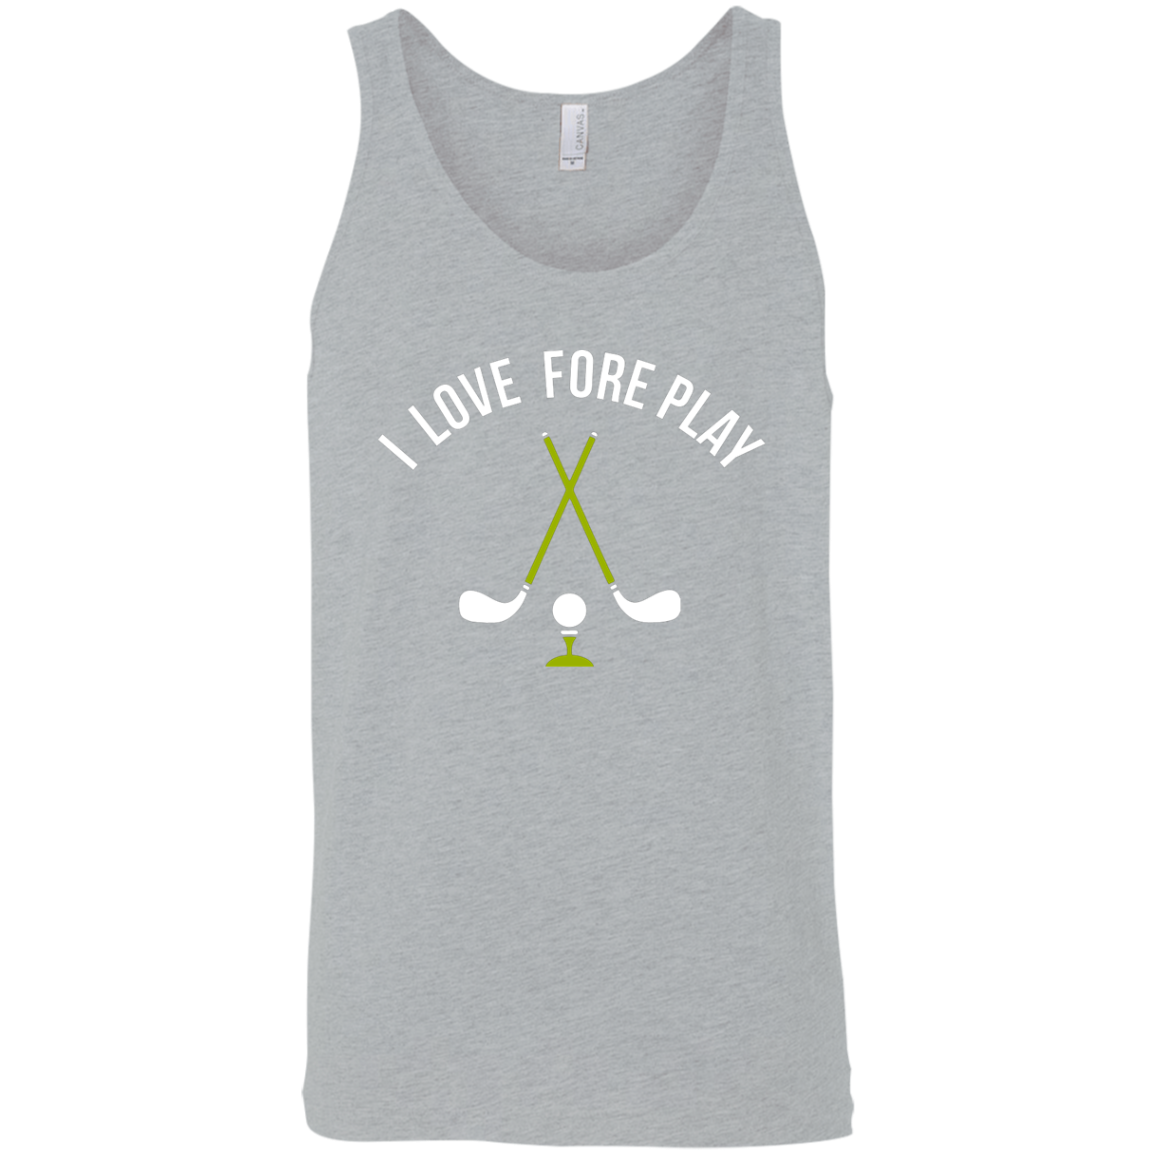 I Love Fore Play Tank Top Apparel - The Beer Lodge